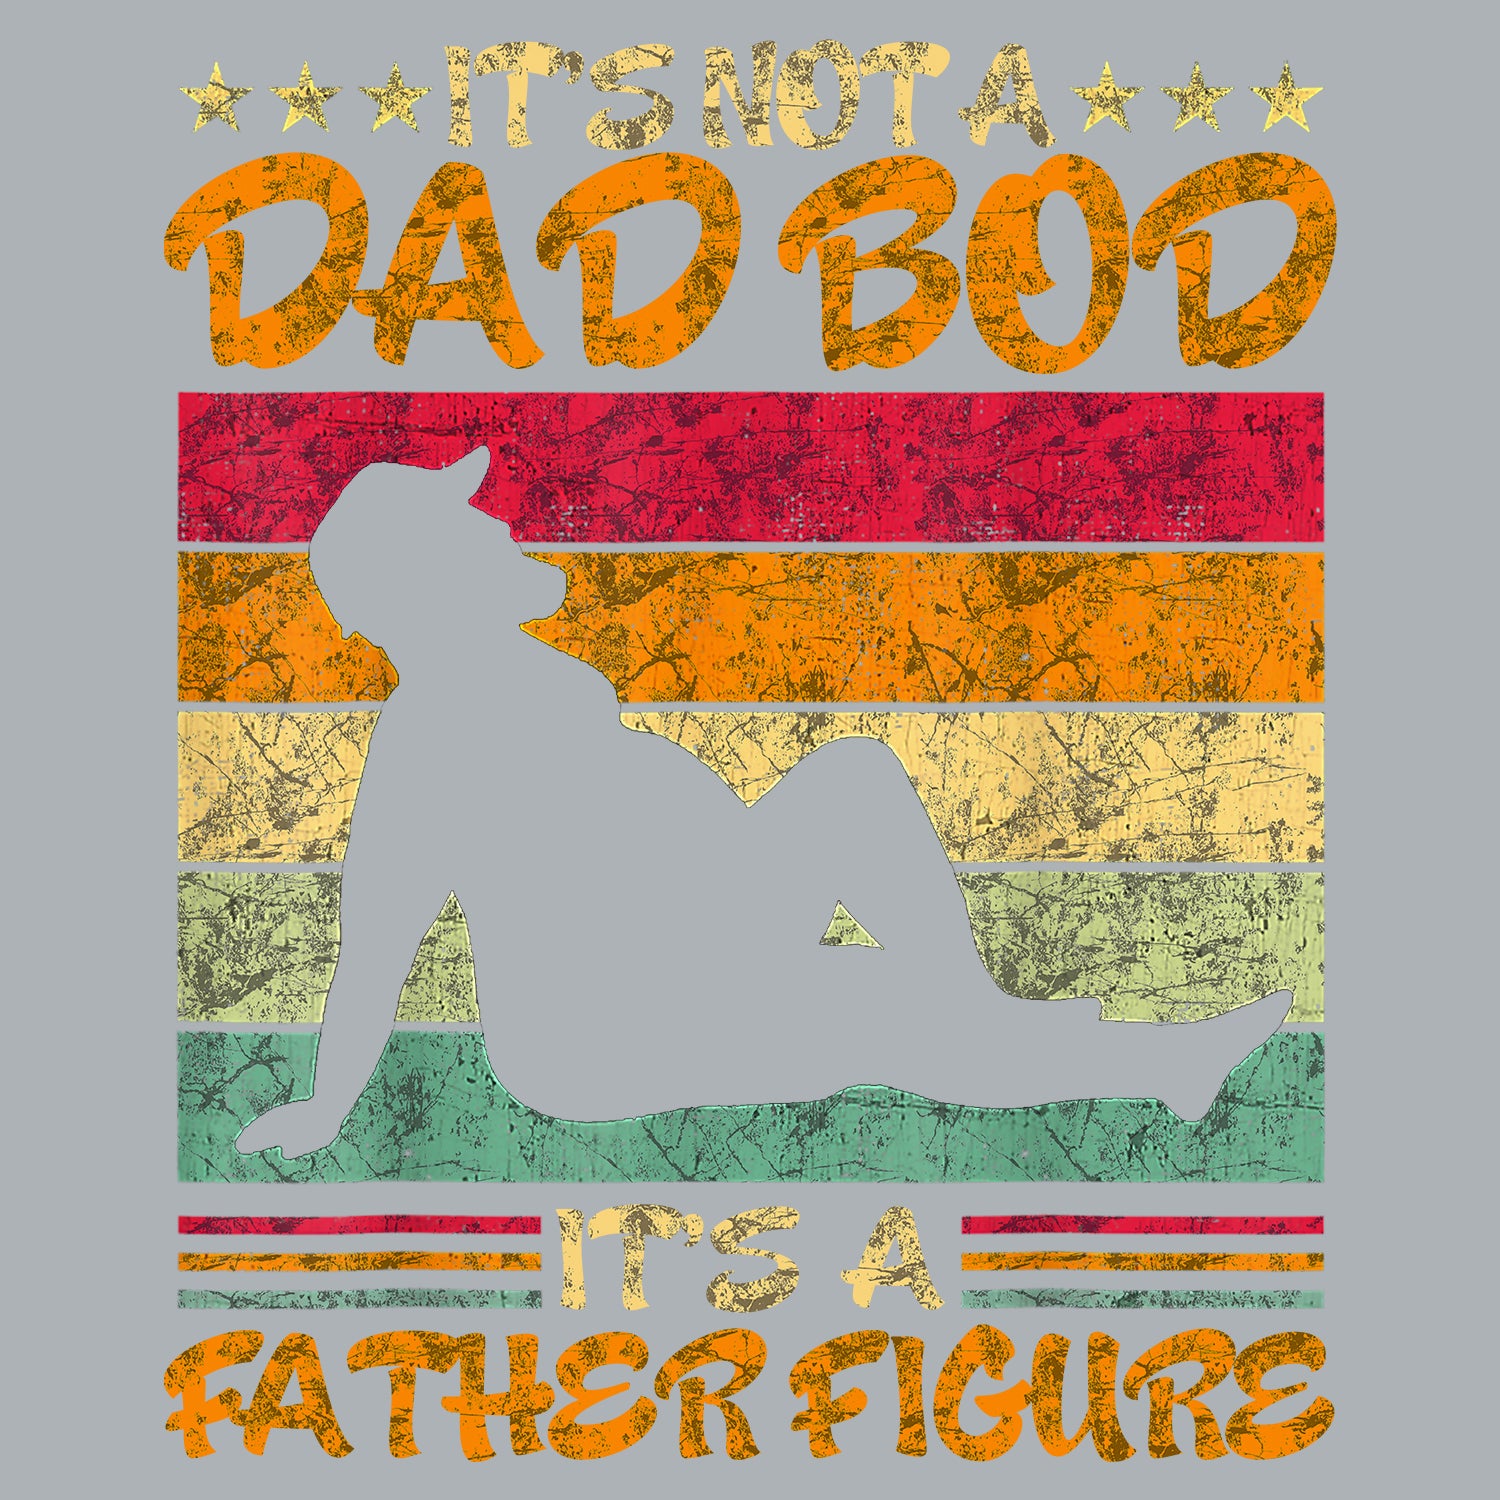 It's Not A Dad Bod It's A Father Figure Father's Day T-Shirt